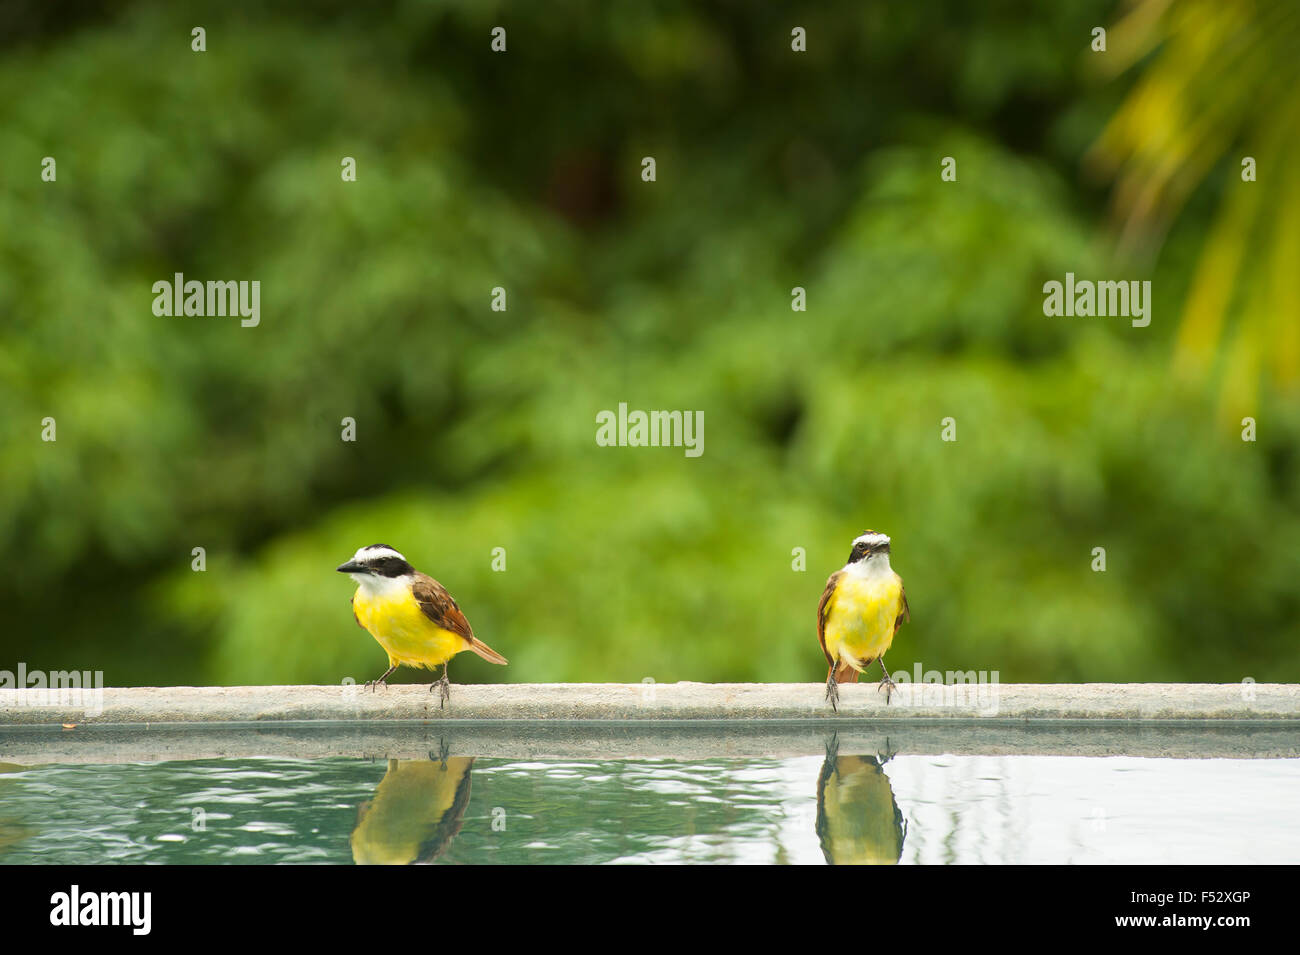 Two white ringed flycatchers rest at the edge of a pool in the tropical rain forest Stock Photo